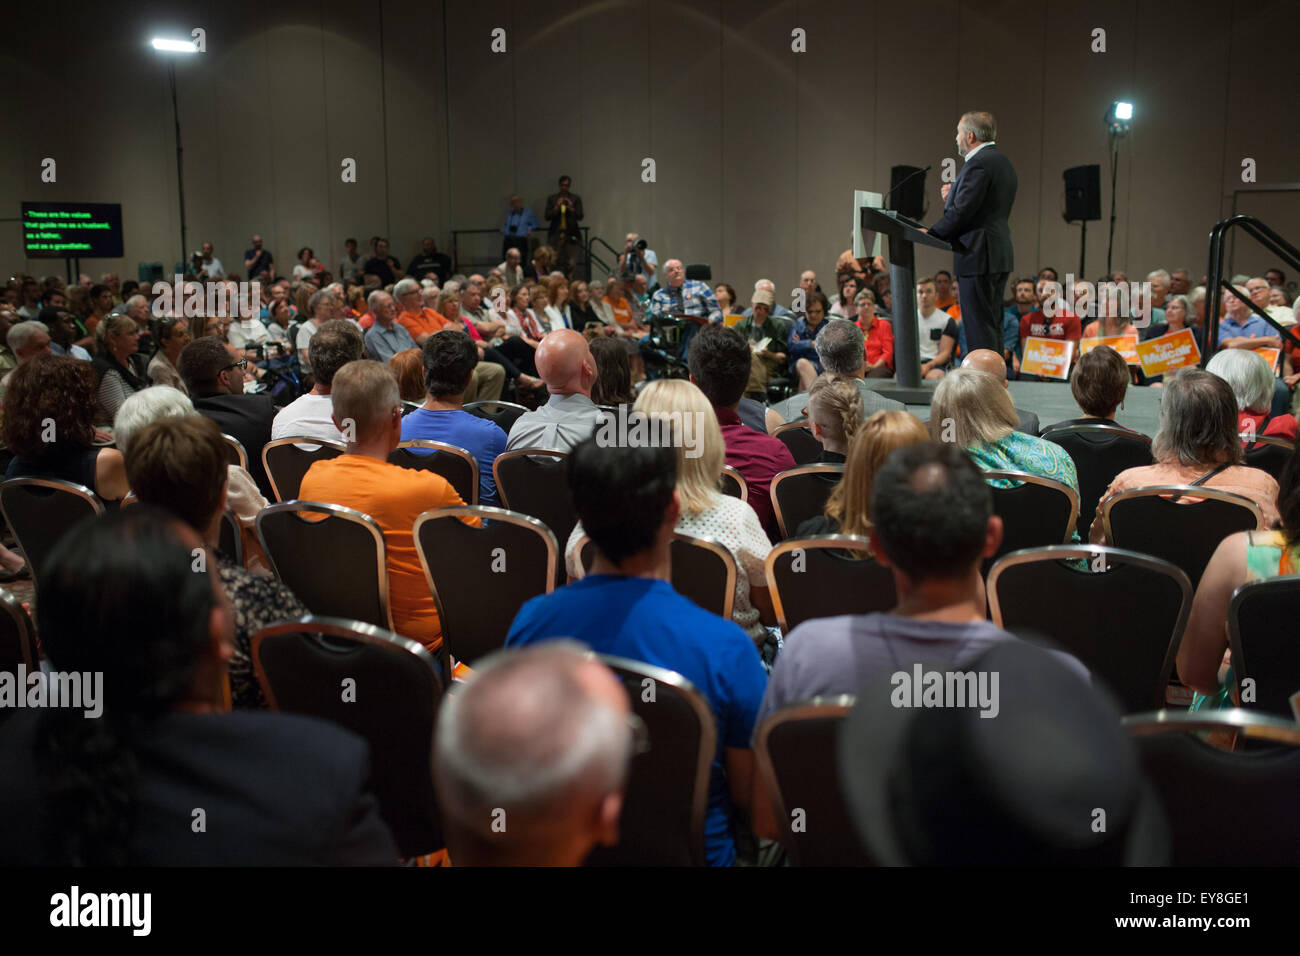 London, Ontario, Canada. 23rd July, 2015. Thomas Mulcair, leader of the opposition and the New Democratic Part of Canada delivers a pre-election speech at a rally held in London, Canada. At the time the speech was given, his party held a slight lead over the governing Conservative Party of Canada lead by current Prime Minister Stephen Harper. Credit:  Mark Spowart/Alamy Live News Stock Photo